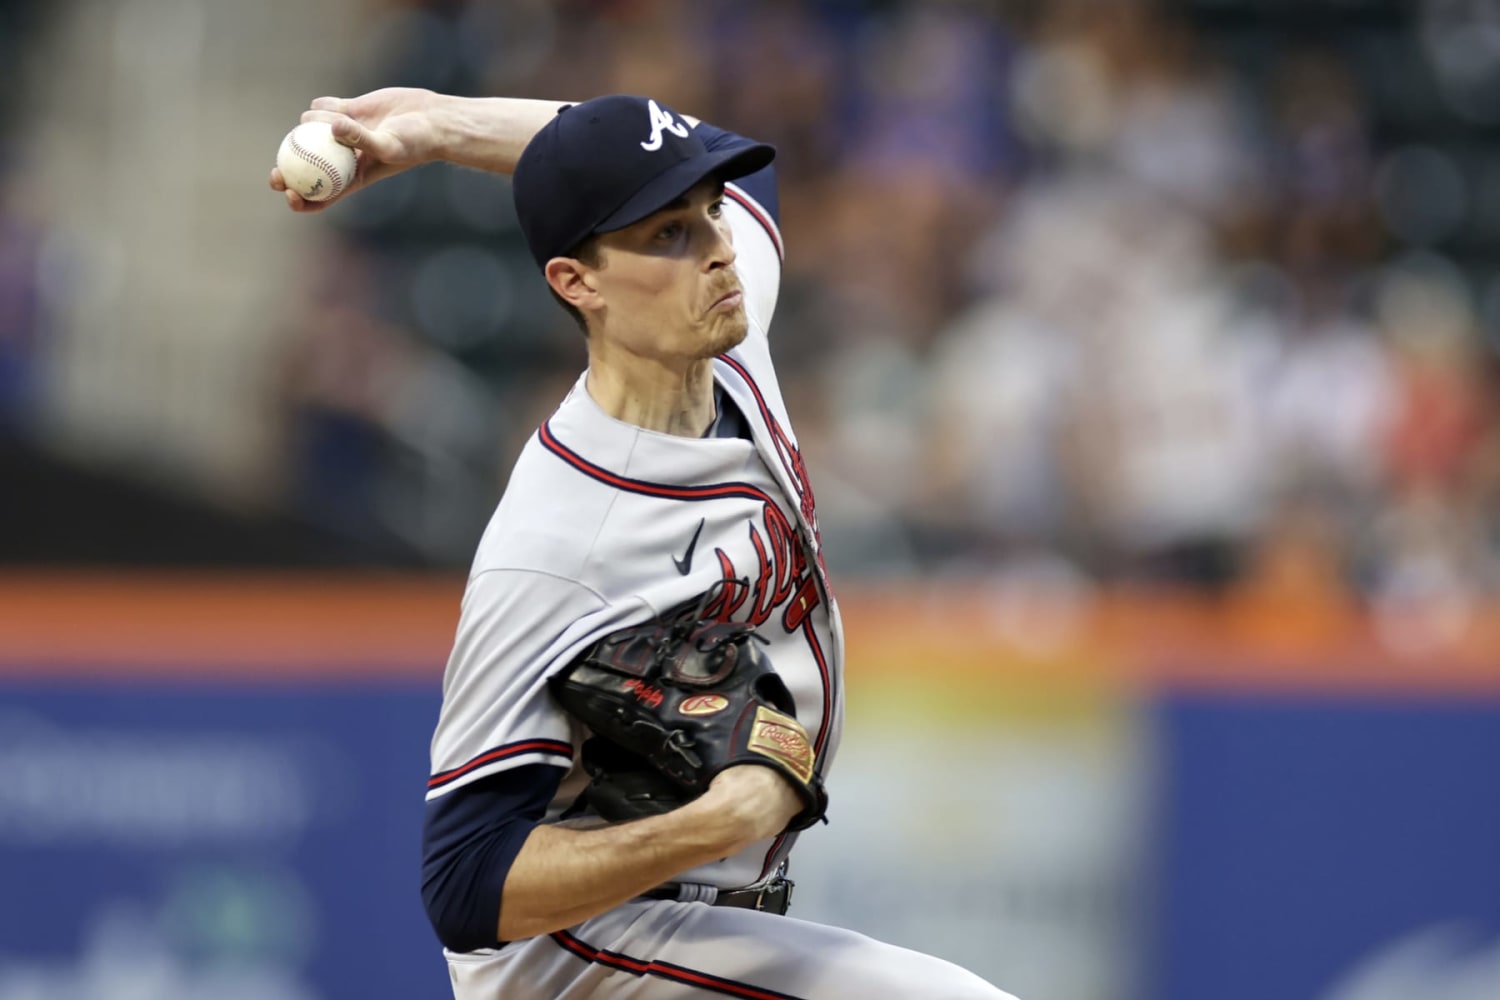 Max Fried exits with tweaked ankle